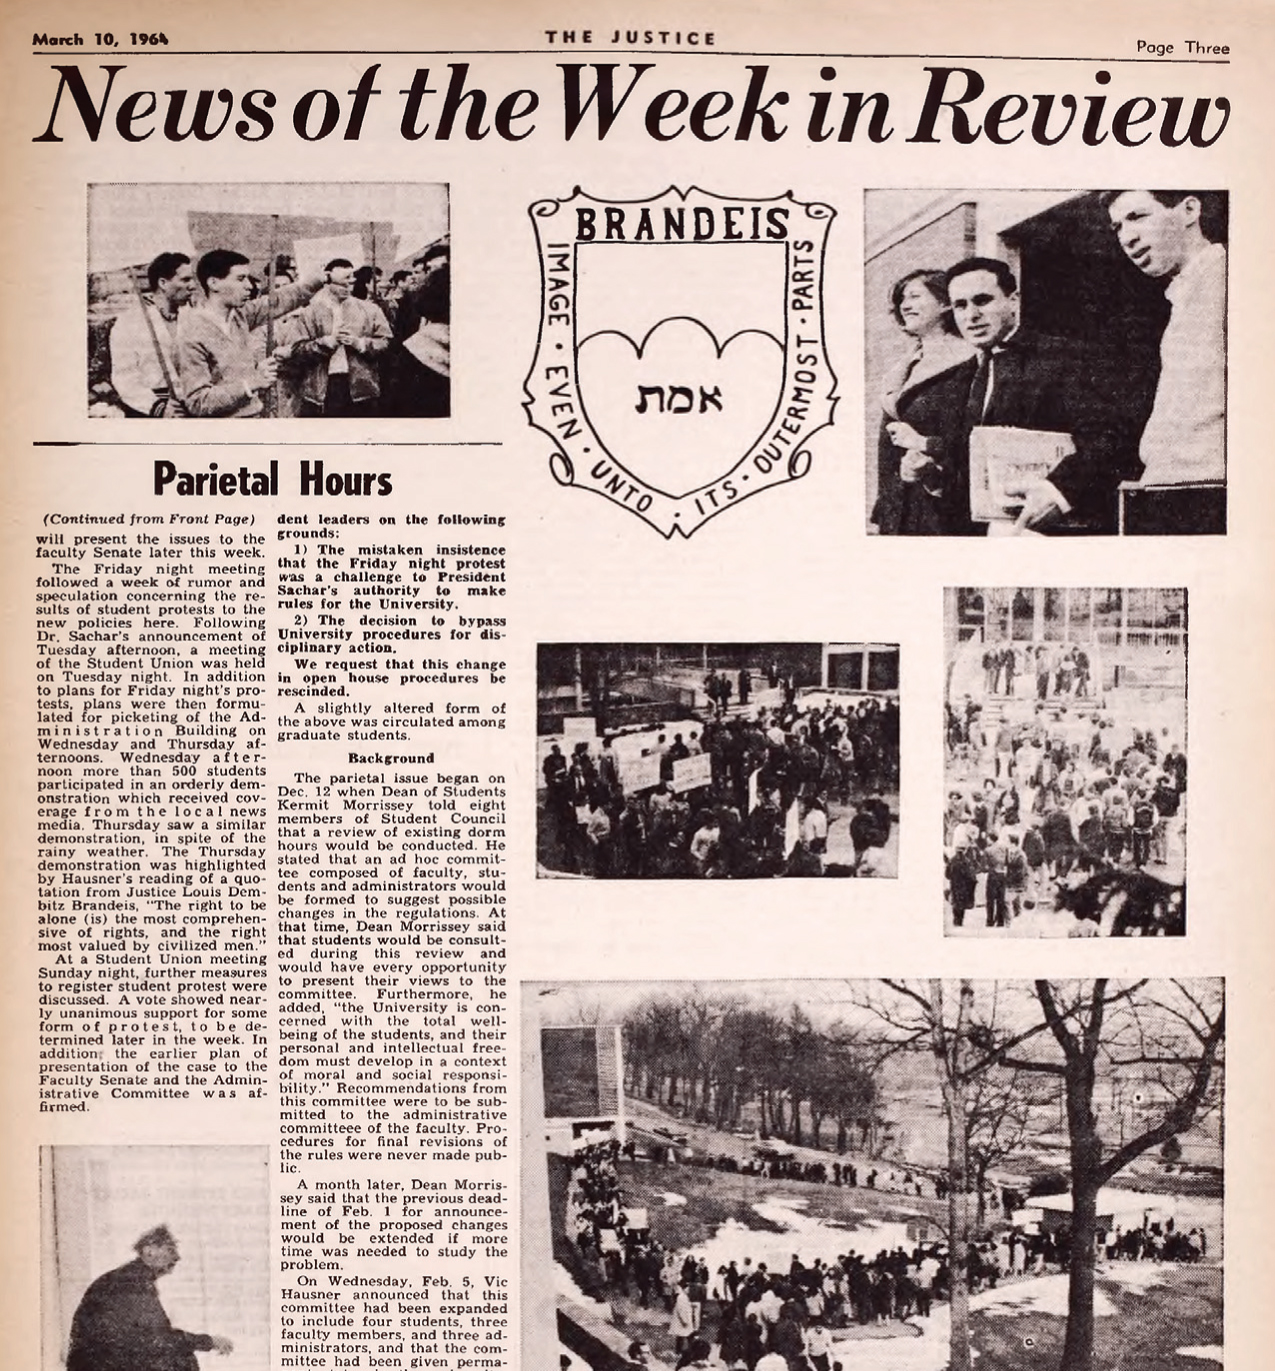 SEEDS OF CHANGE: The March 10, 1964, issue of The Justice covered the student protests prompted by Sachar's open-door edict.